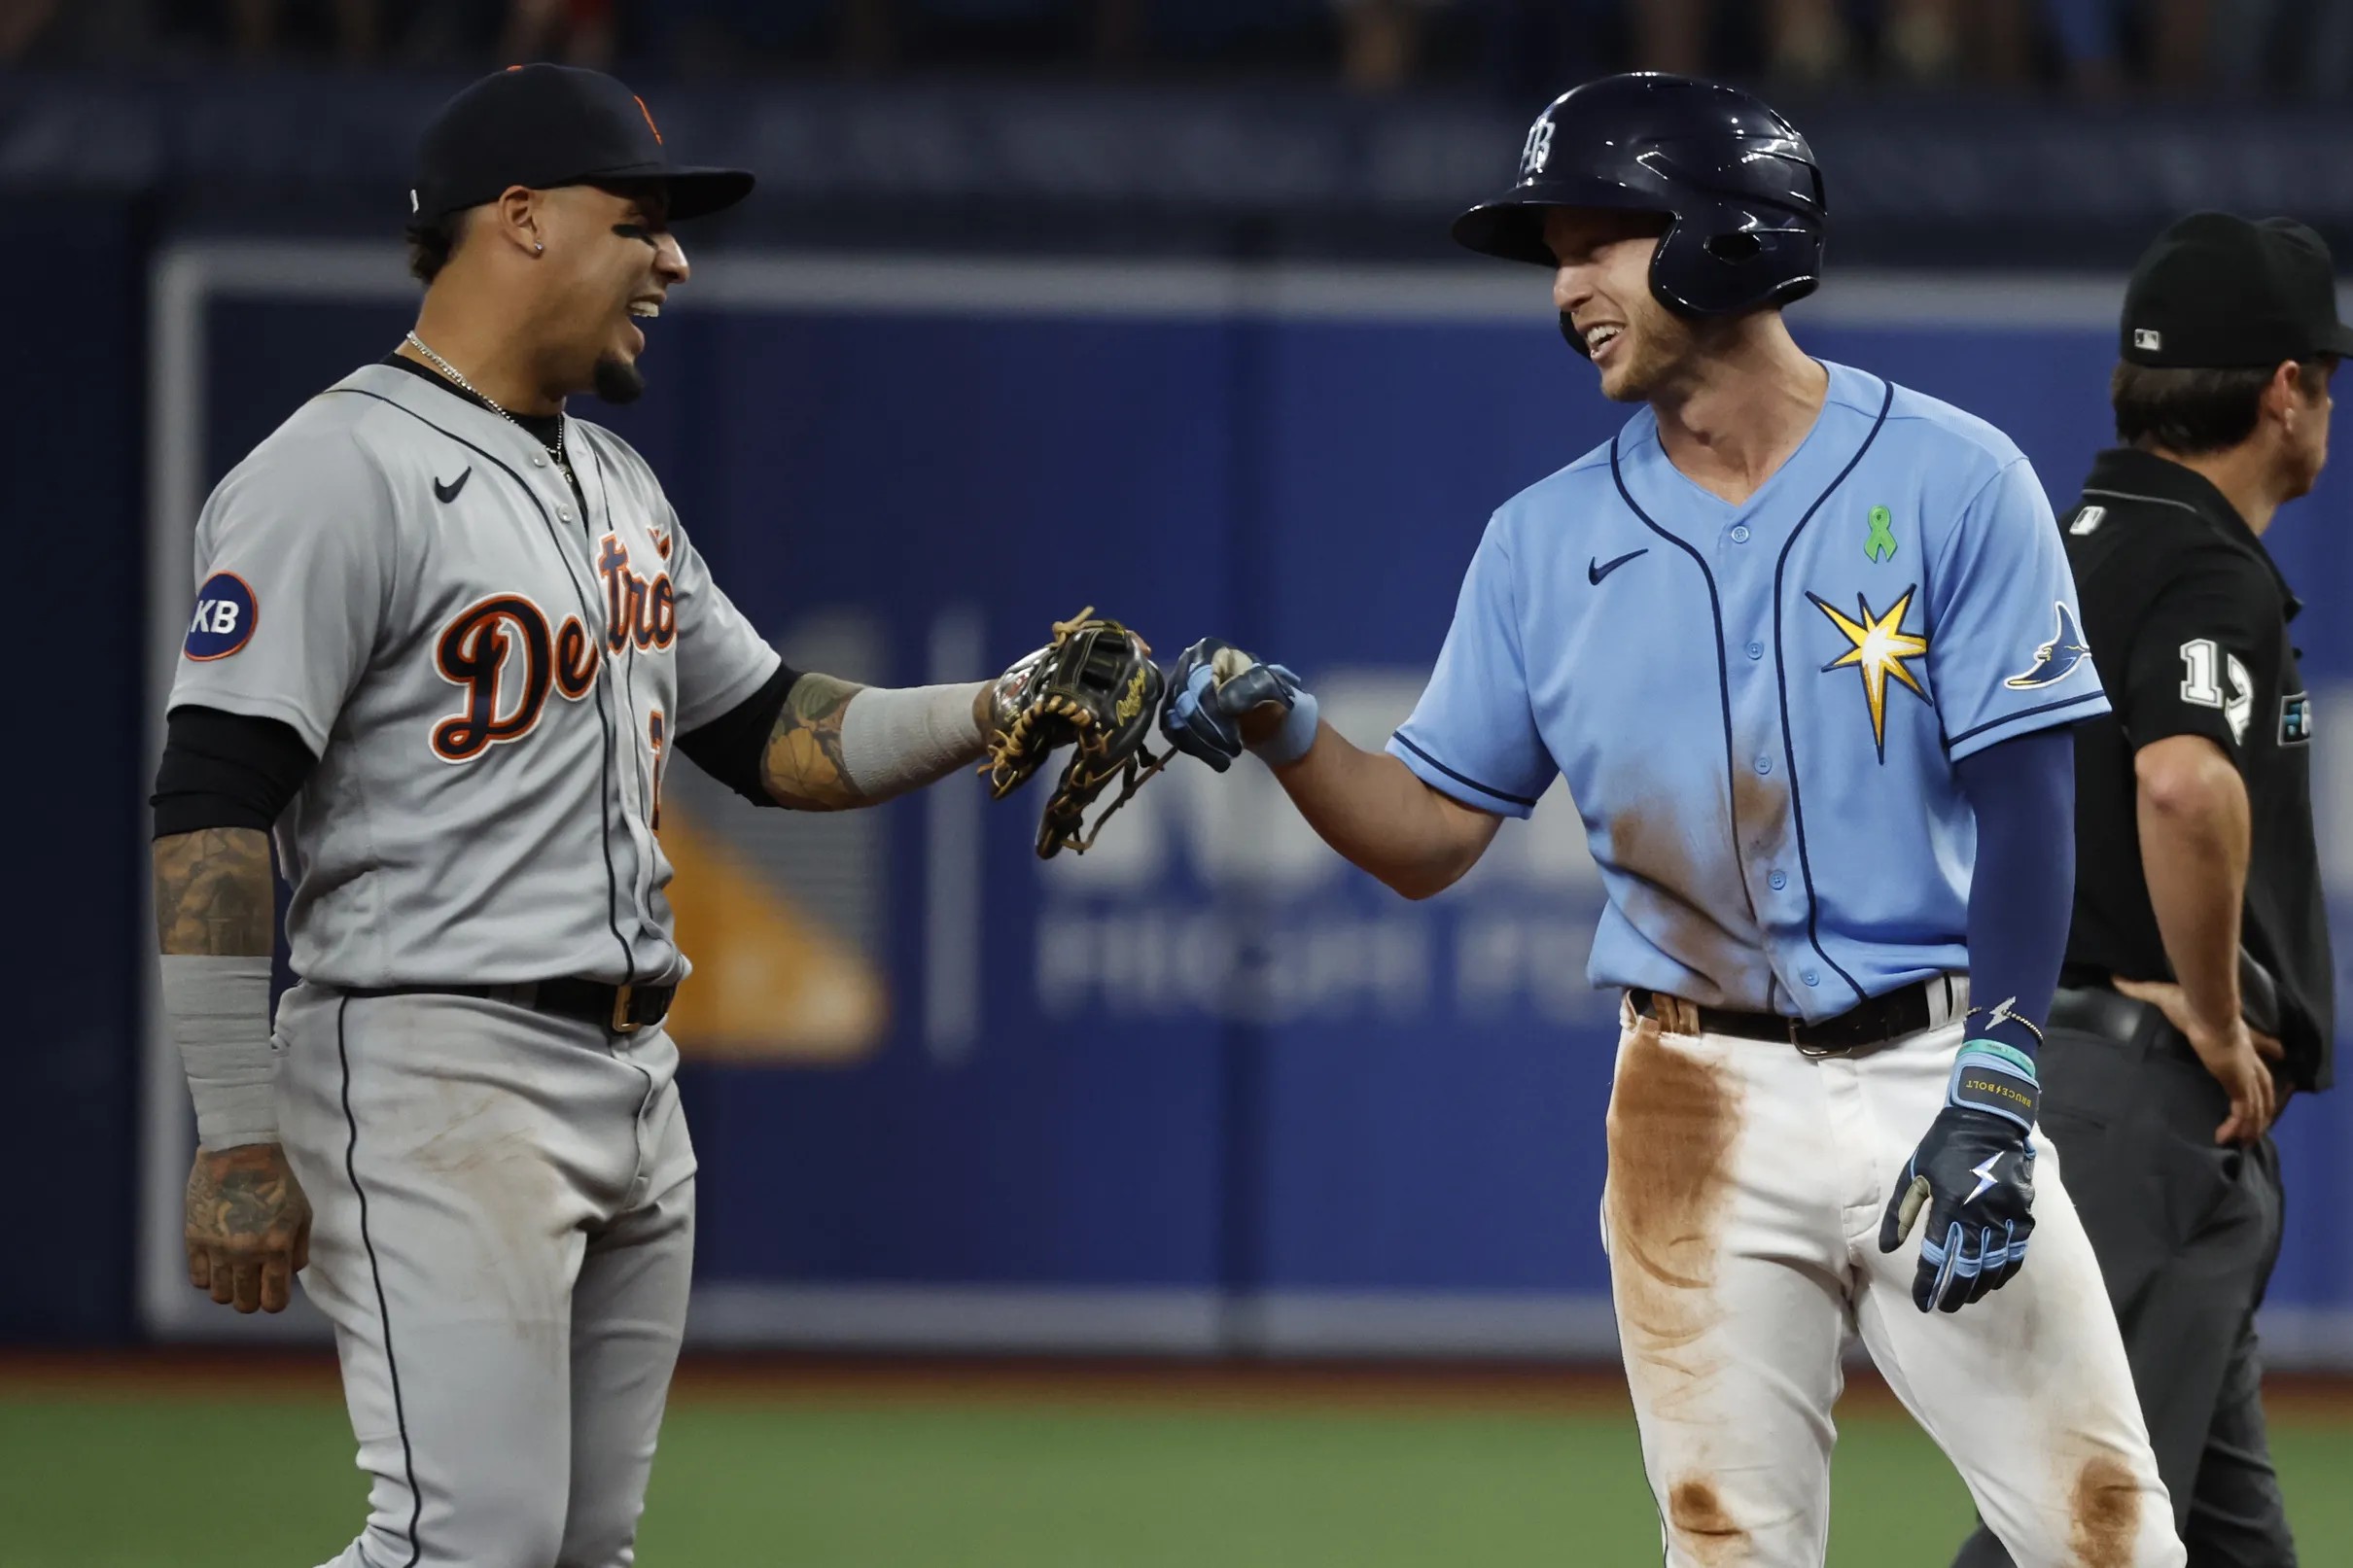 Rays 2 Tigers 3: At least Brett Phillips is out of his slump